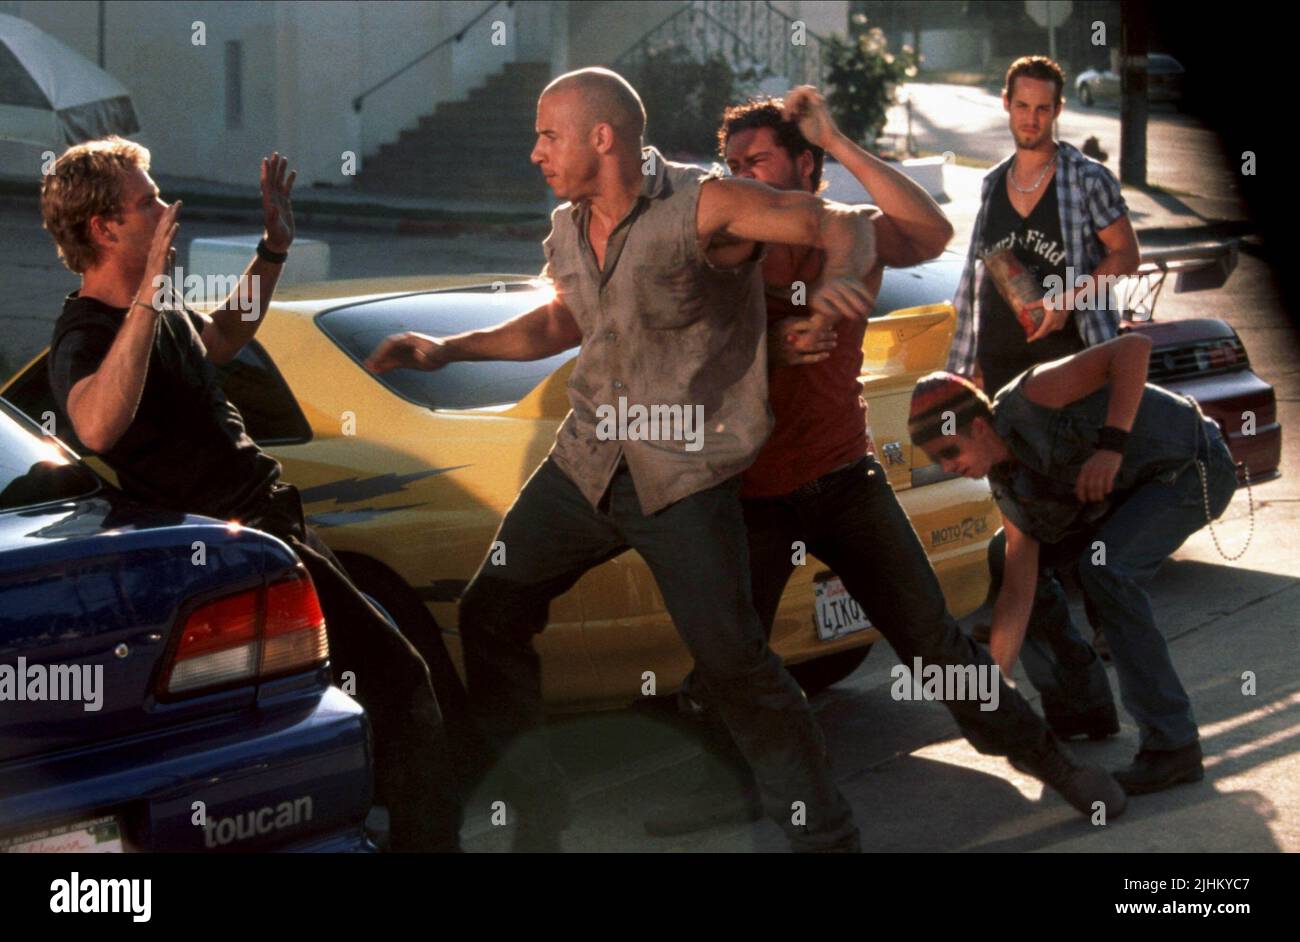 PAUL WALKER, VIN DIESEL, MATT SCHULZE, CHAD LINDBERG, JOHNNY STRONG, THE FAST AND THE FURIOUS, 2001 Stock Photo